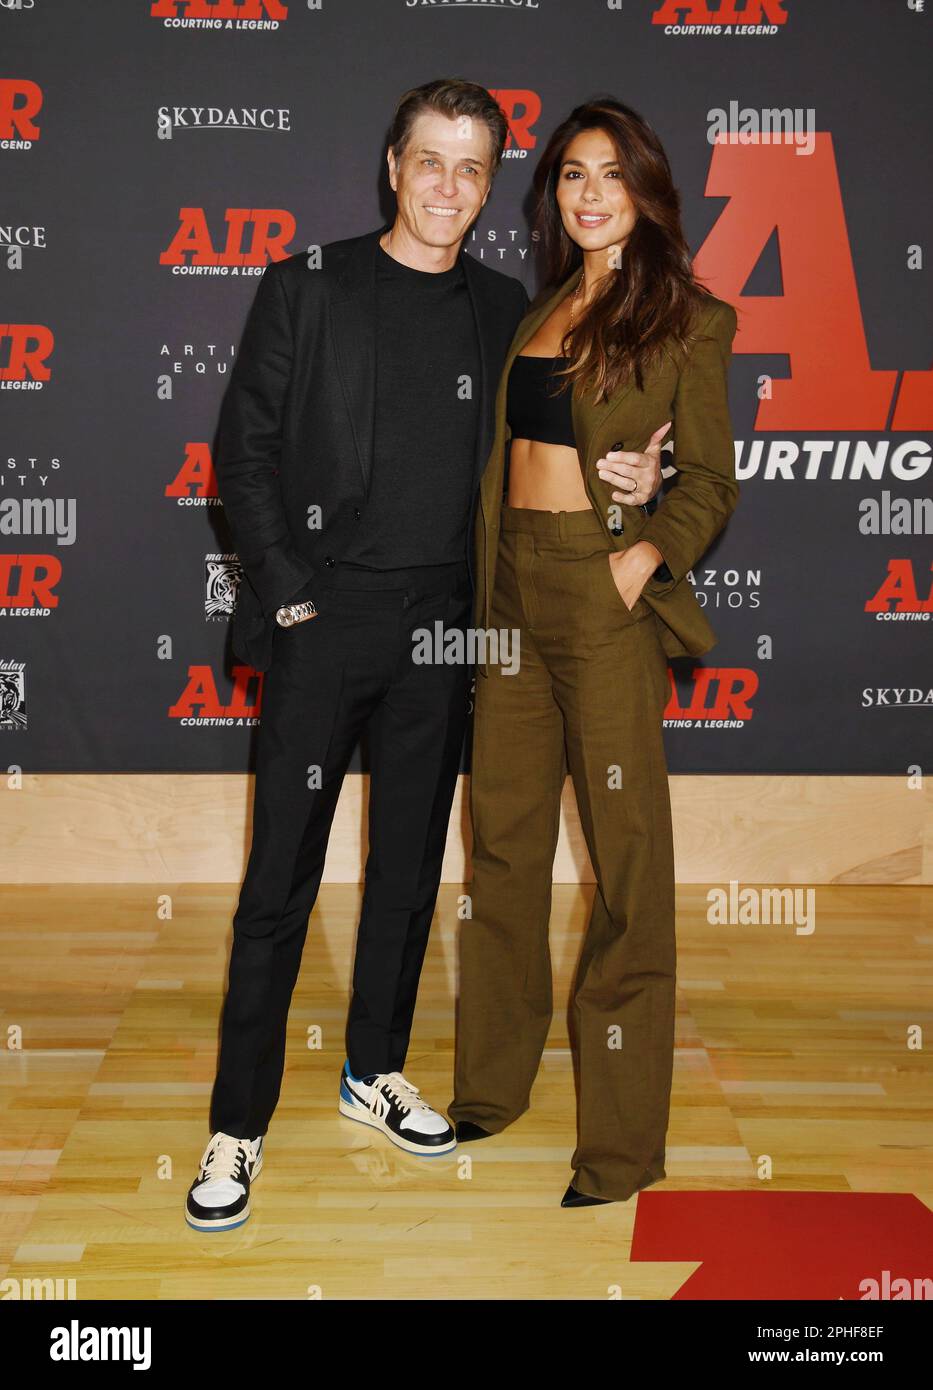 LOS ANGELES, CALIFORNIA - MARCH 27: (L-R) Patrick Whitesell and Pia Miller  Whitsell attend Amazon Studios' World Premiere Of "AIR" at Regency Village  Stock Photo - Alamy